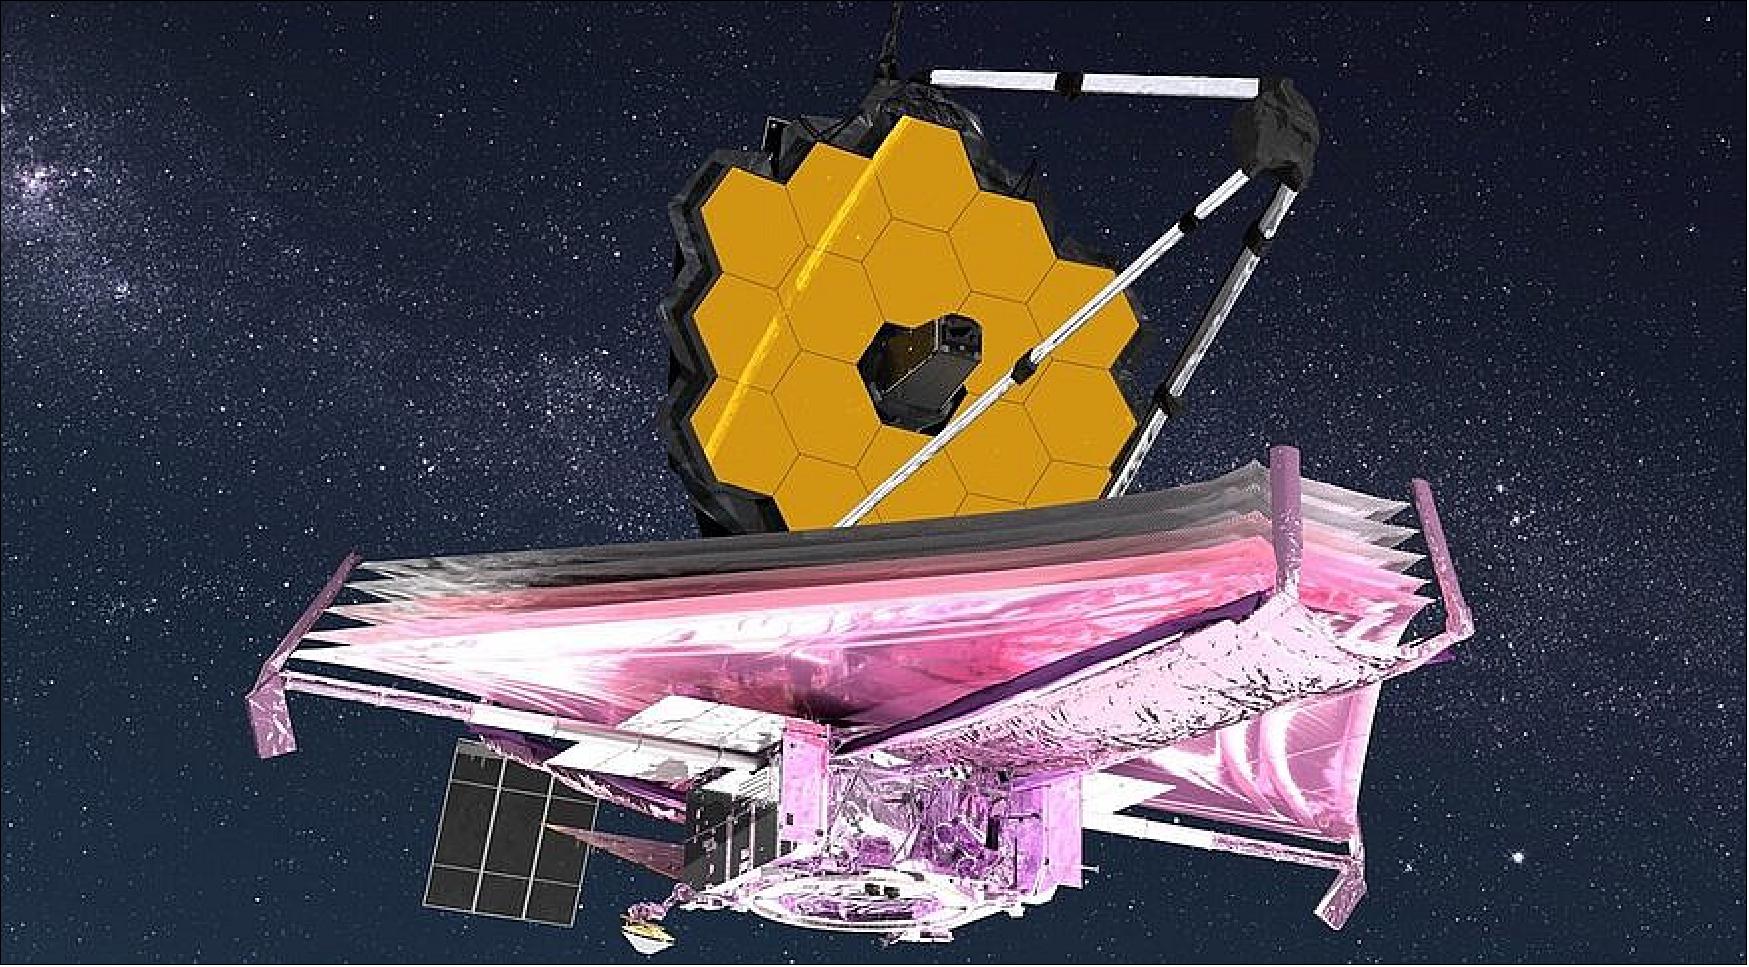 Figure 39: After launch, JWST requires two weeks of major deployments of its sunshield and telescope, a process with many potential failure modes (image credit: NASA GSFC/CIL/Adriana Manrique Gutierrez)